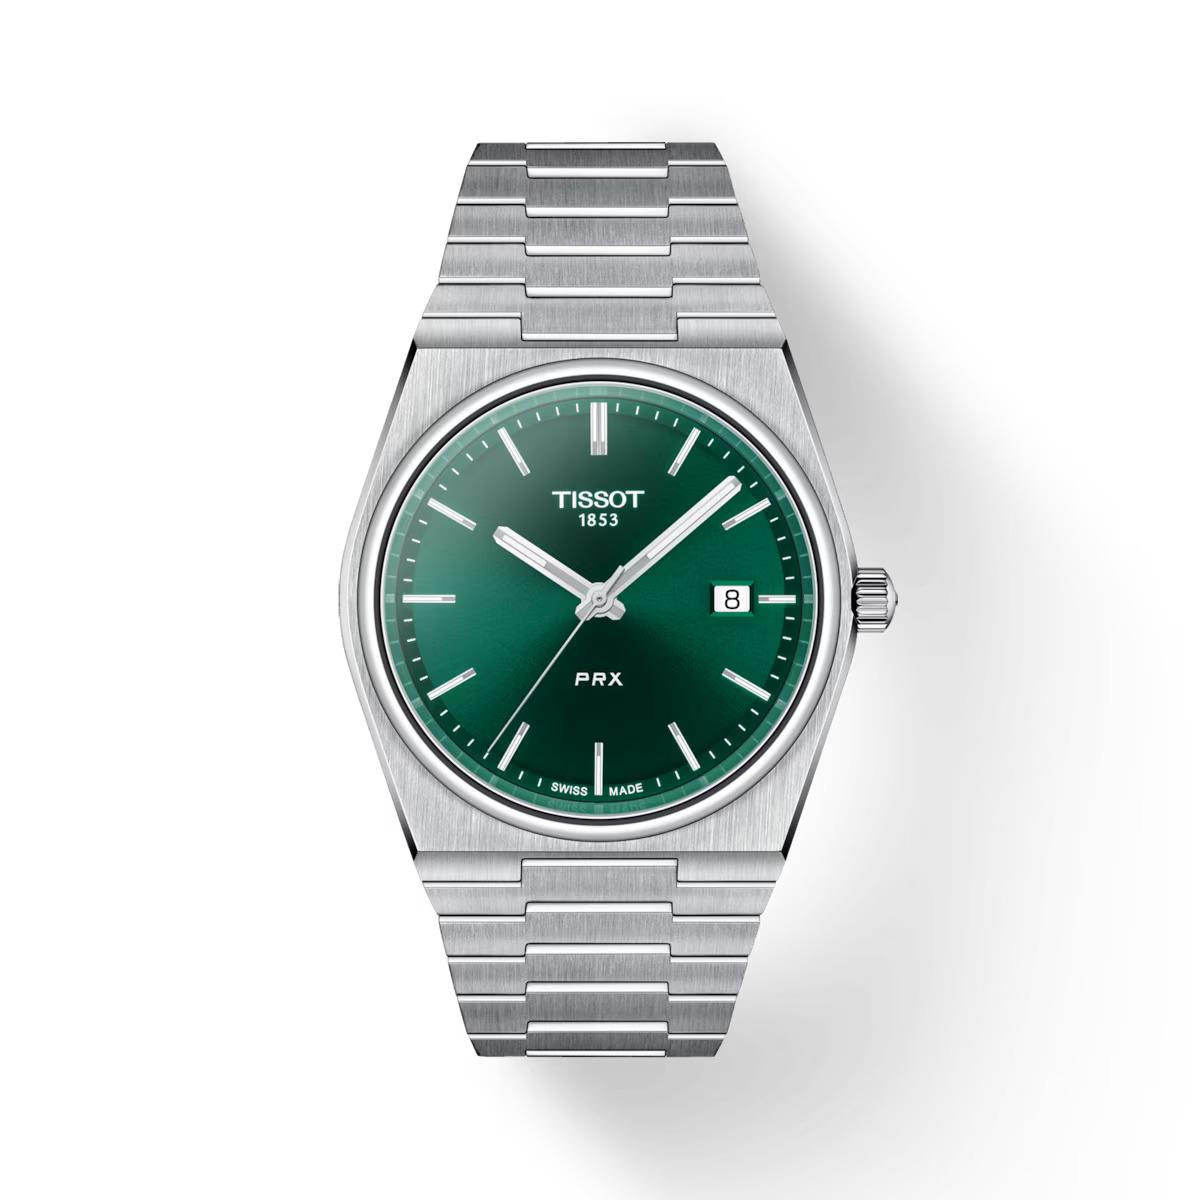 Tissot T-classic Prx 40 mm Green Dial Stainless Steel Watch T137.410.11.091.00